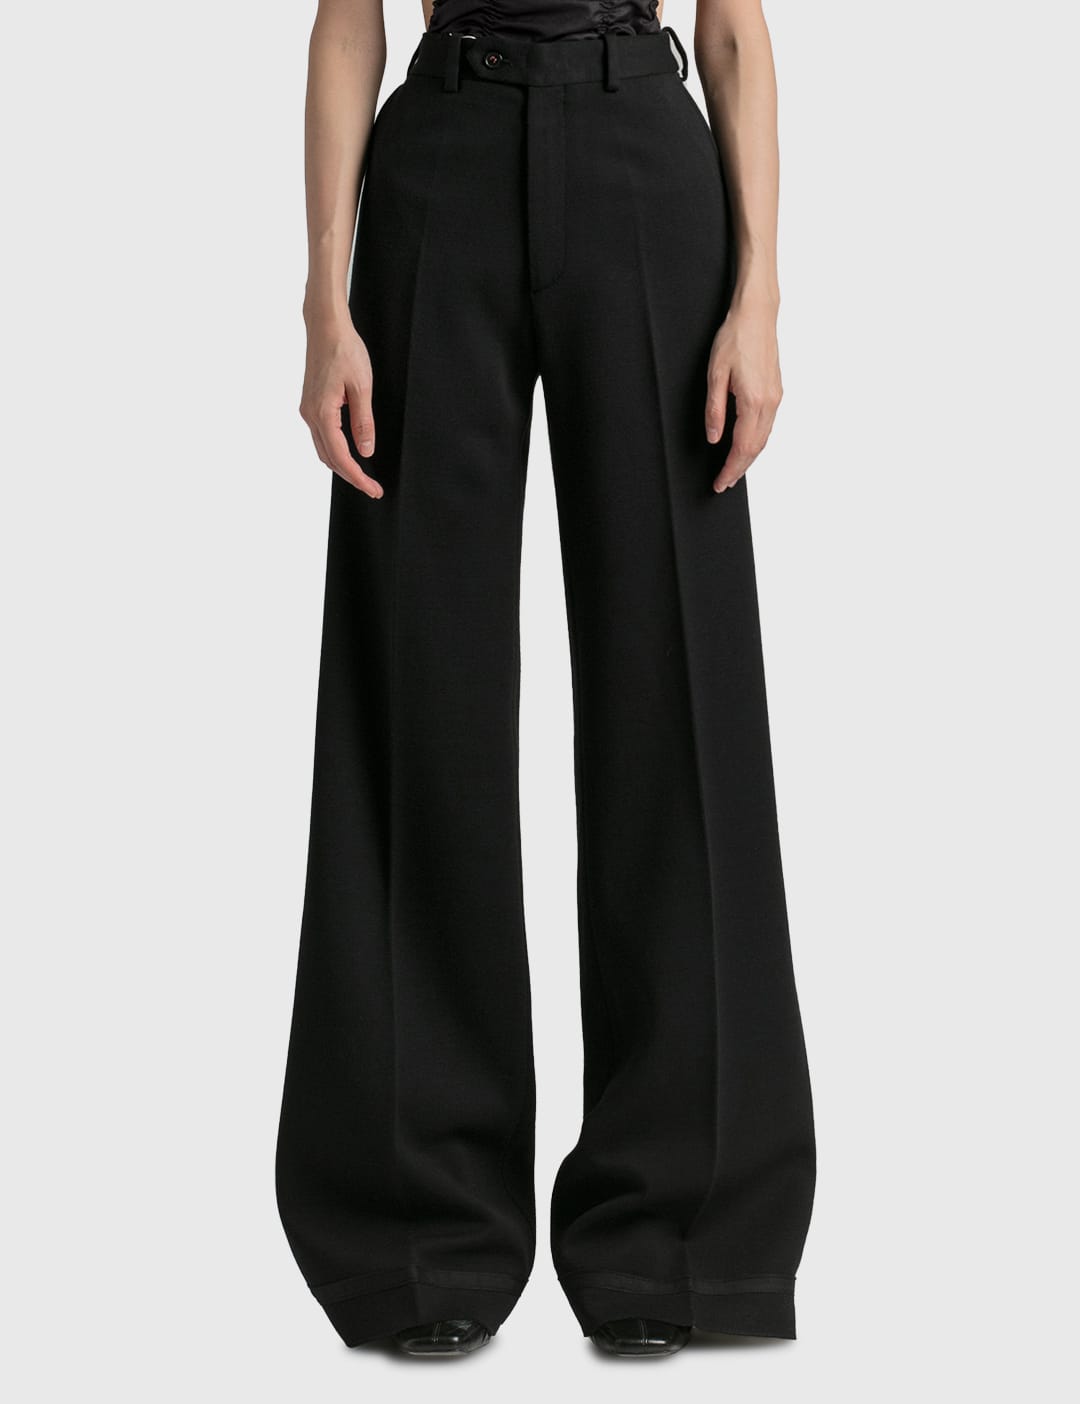 Perverze - Cotton Rib Line Pants | HBX - Globally Curated Fashion 